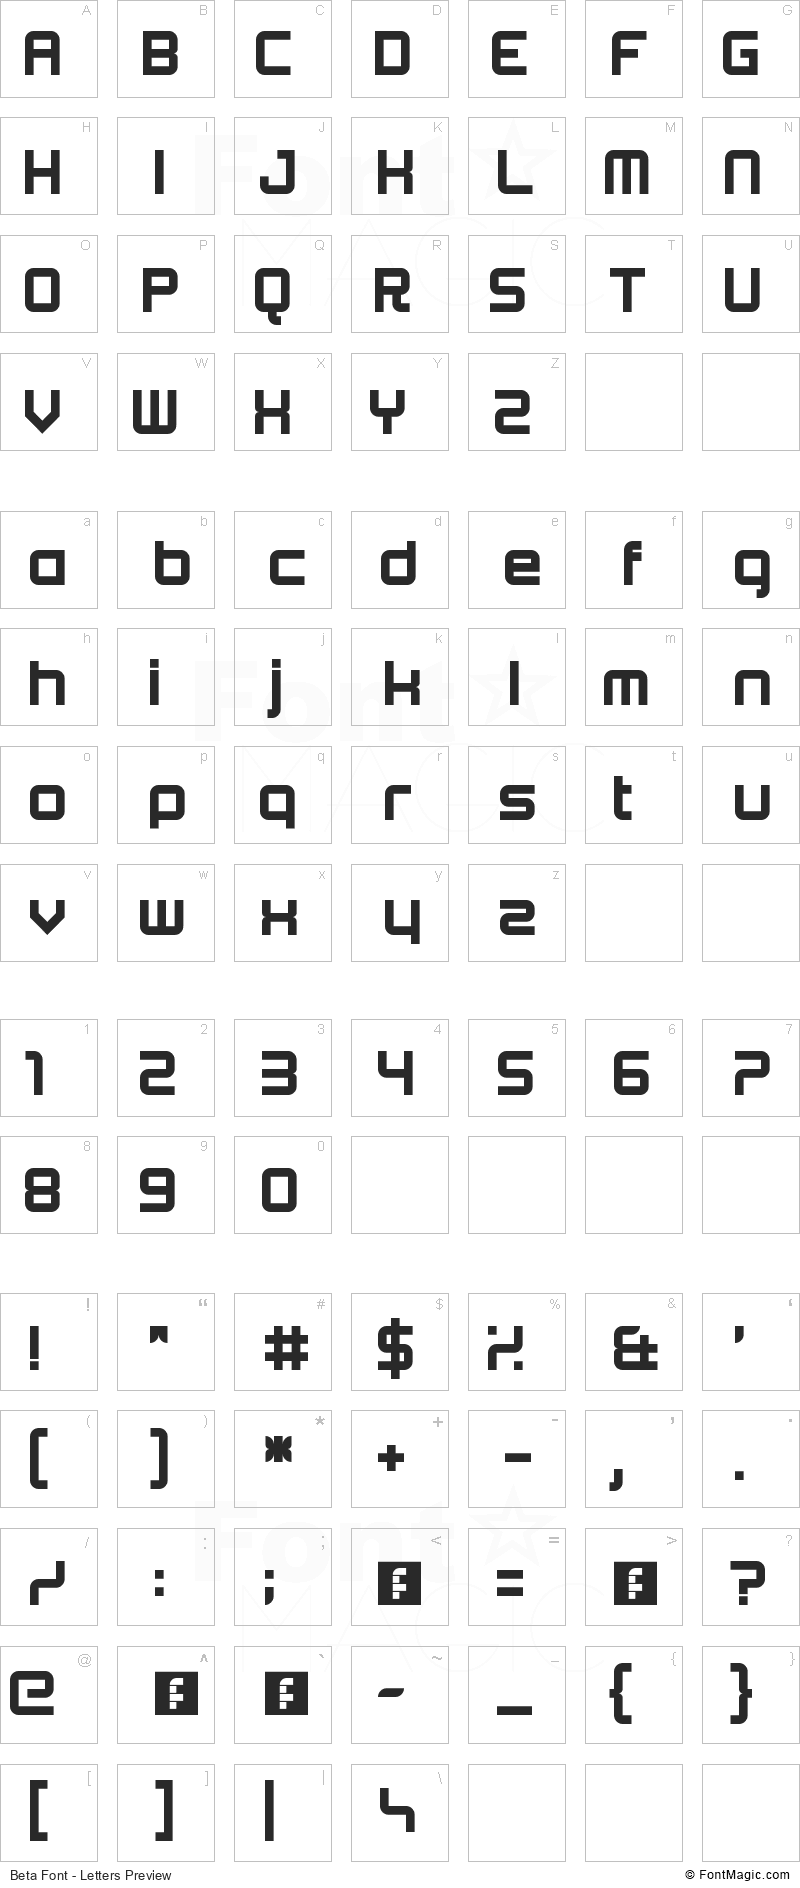 Beta Font - All Latters Preview Chart